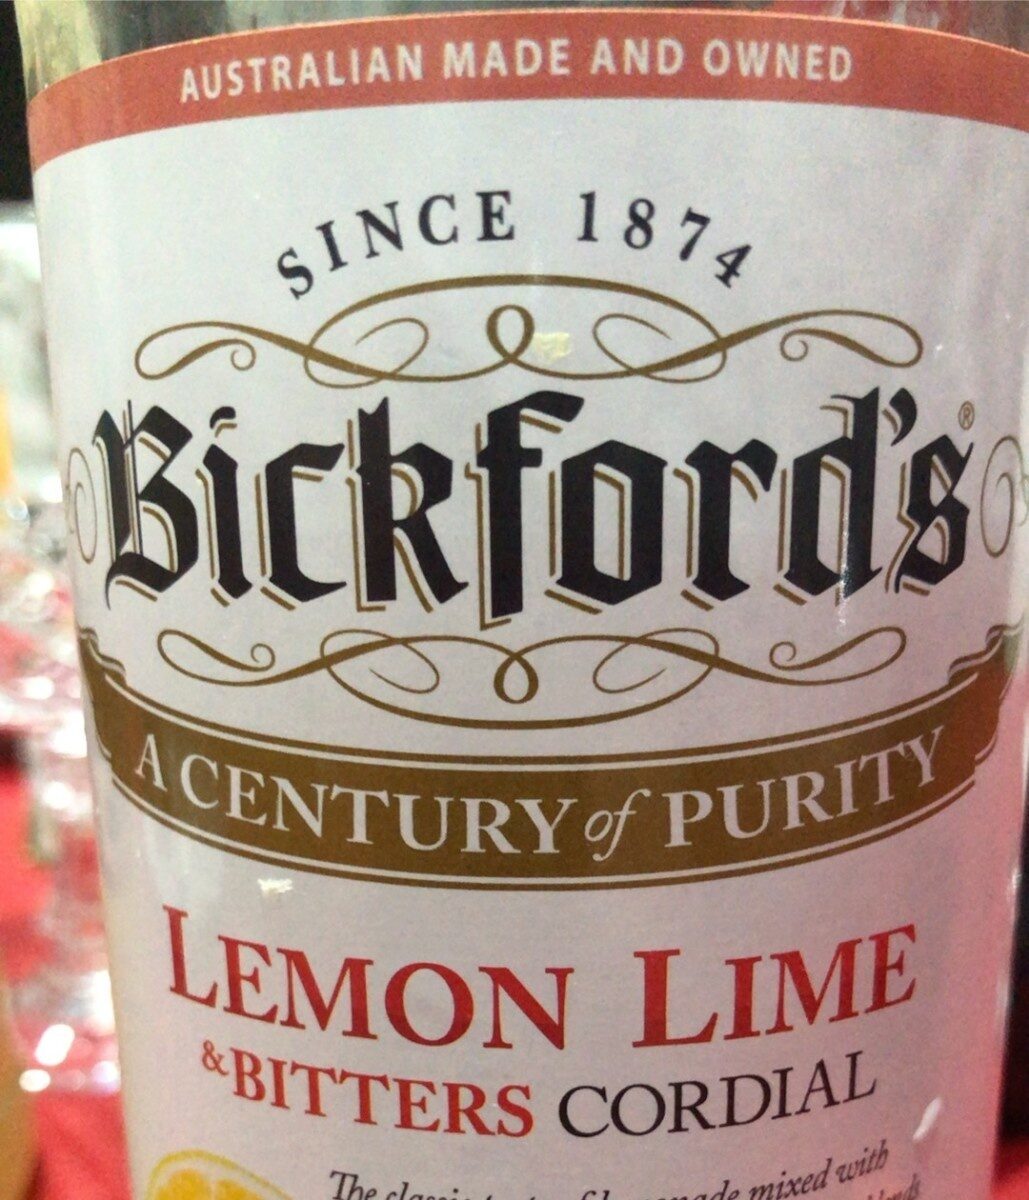 Lemon Lime &Bitters cordial - Product